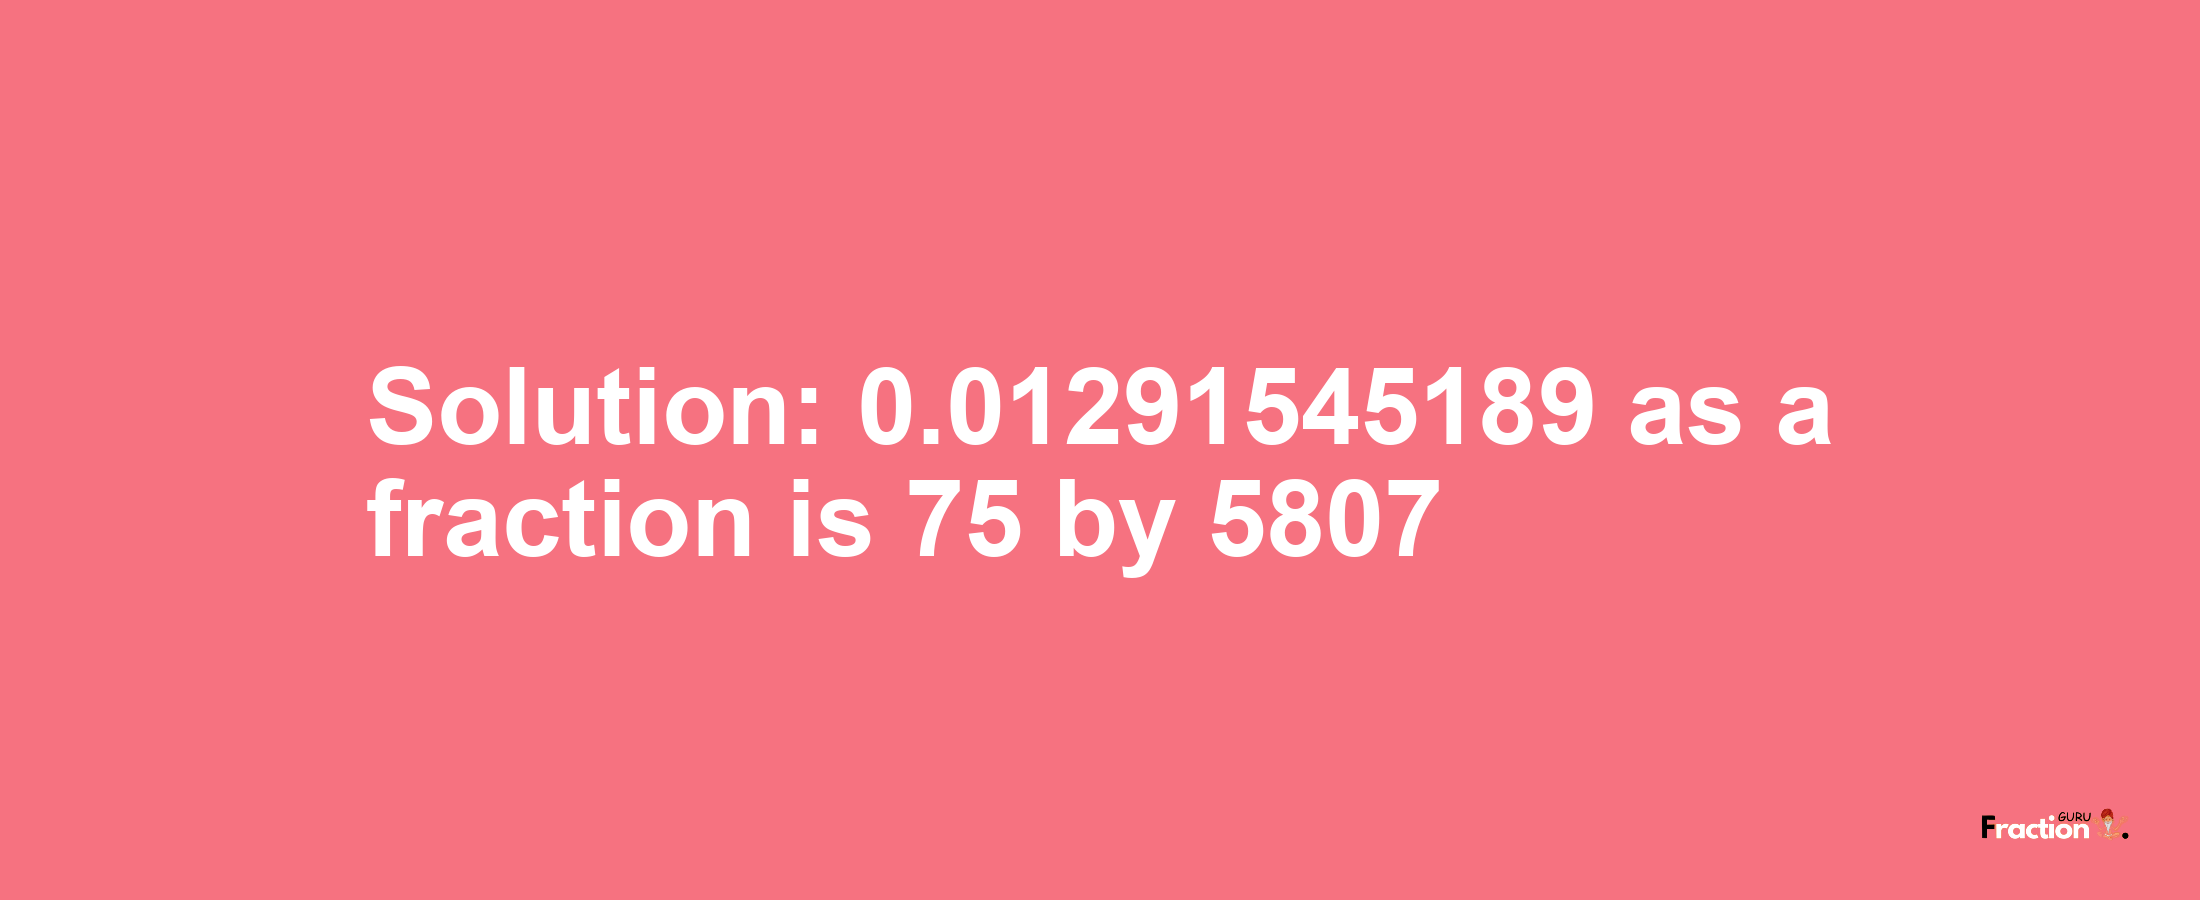 Solution:0.01291545189 as a fraction is 75/5807